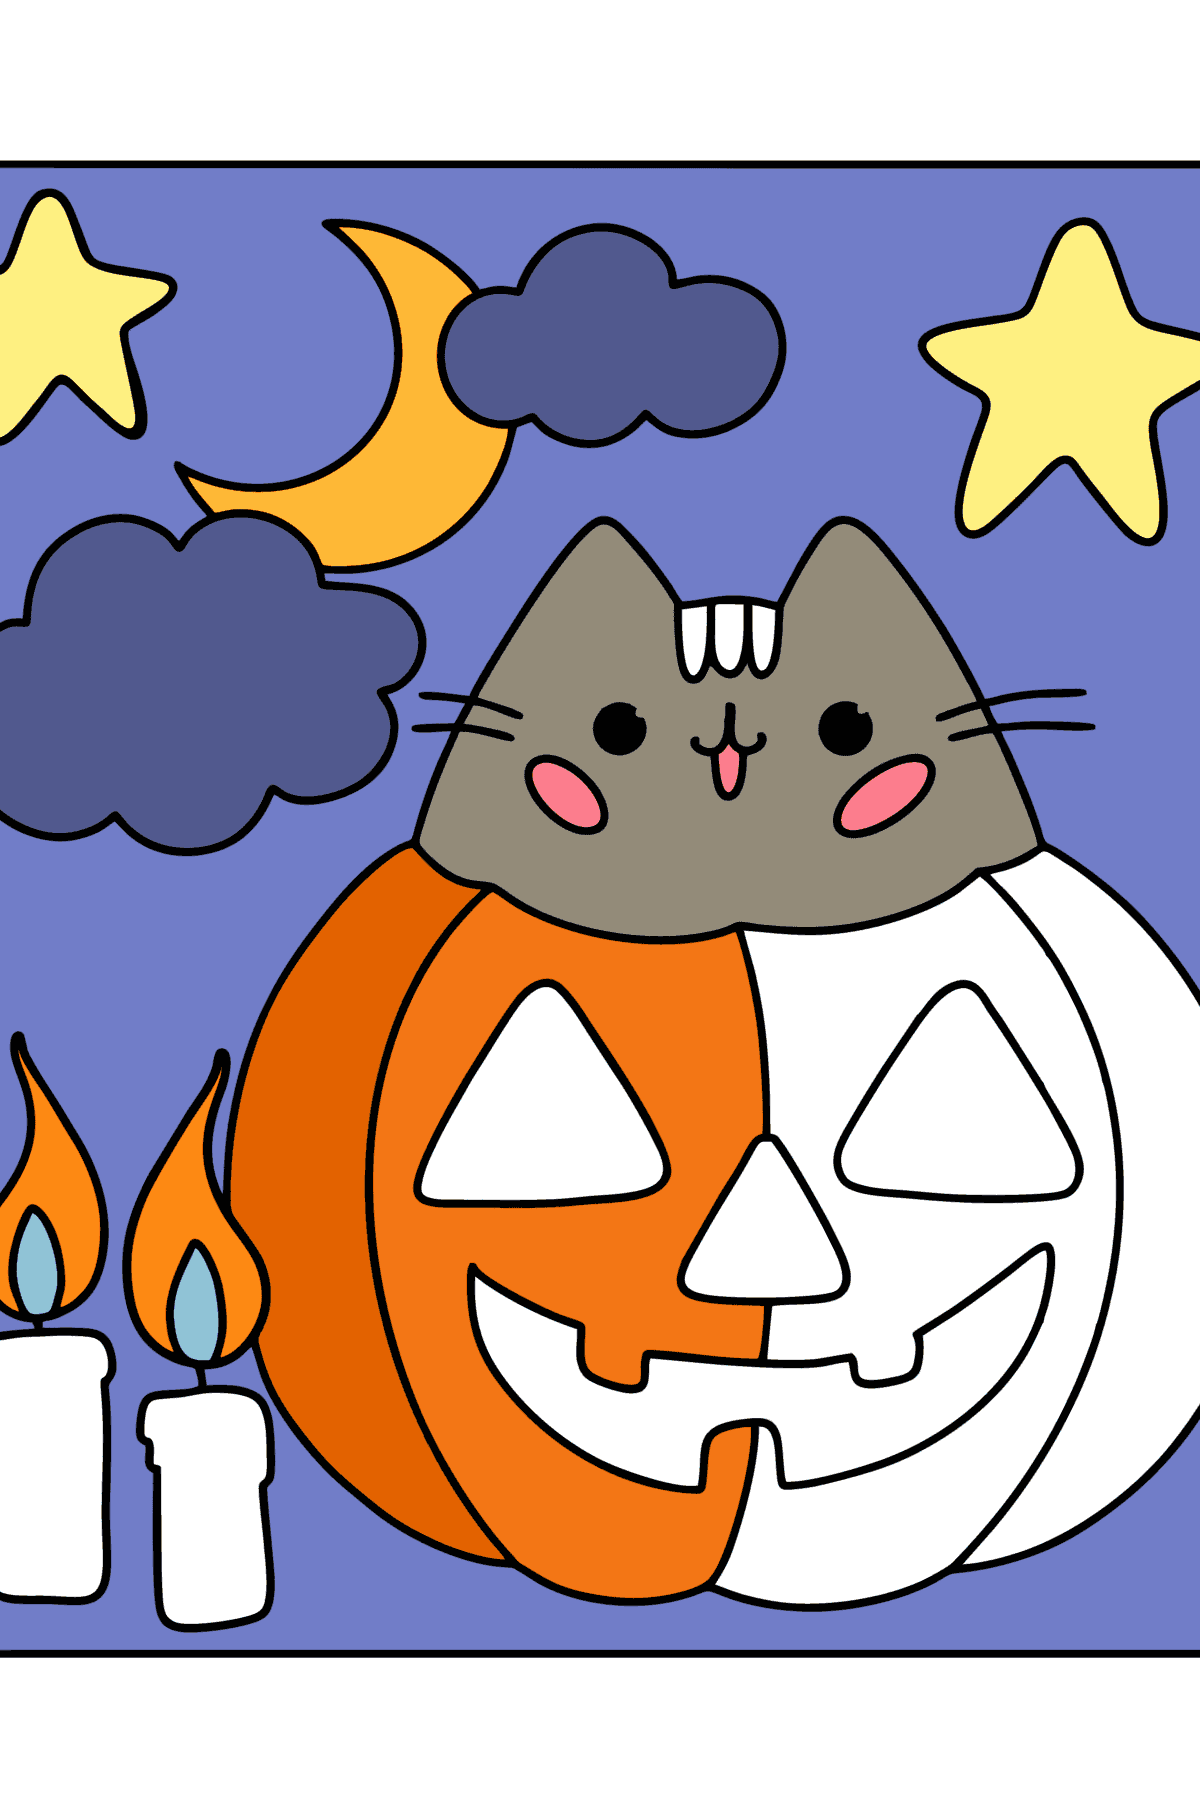 Pusheen and halloween сoloring page - Coloring Pages for Kids